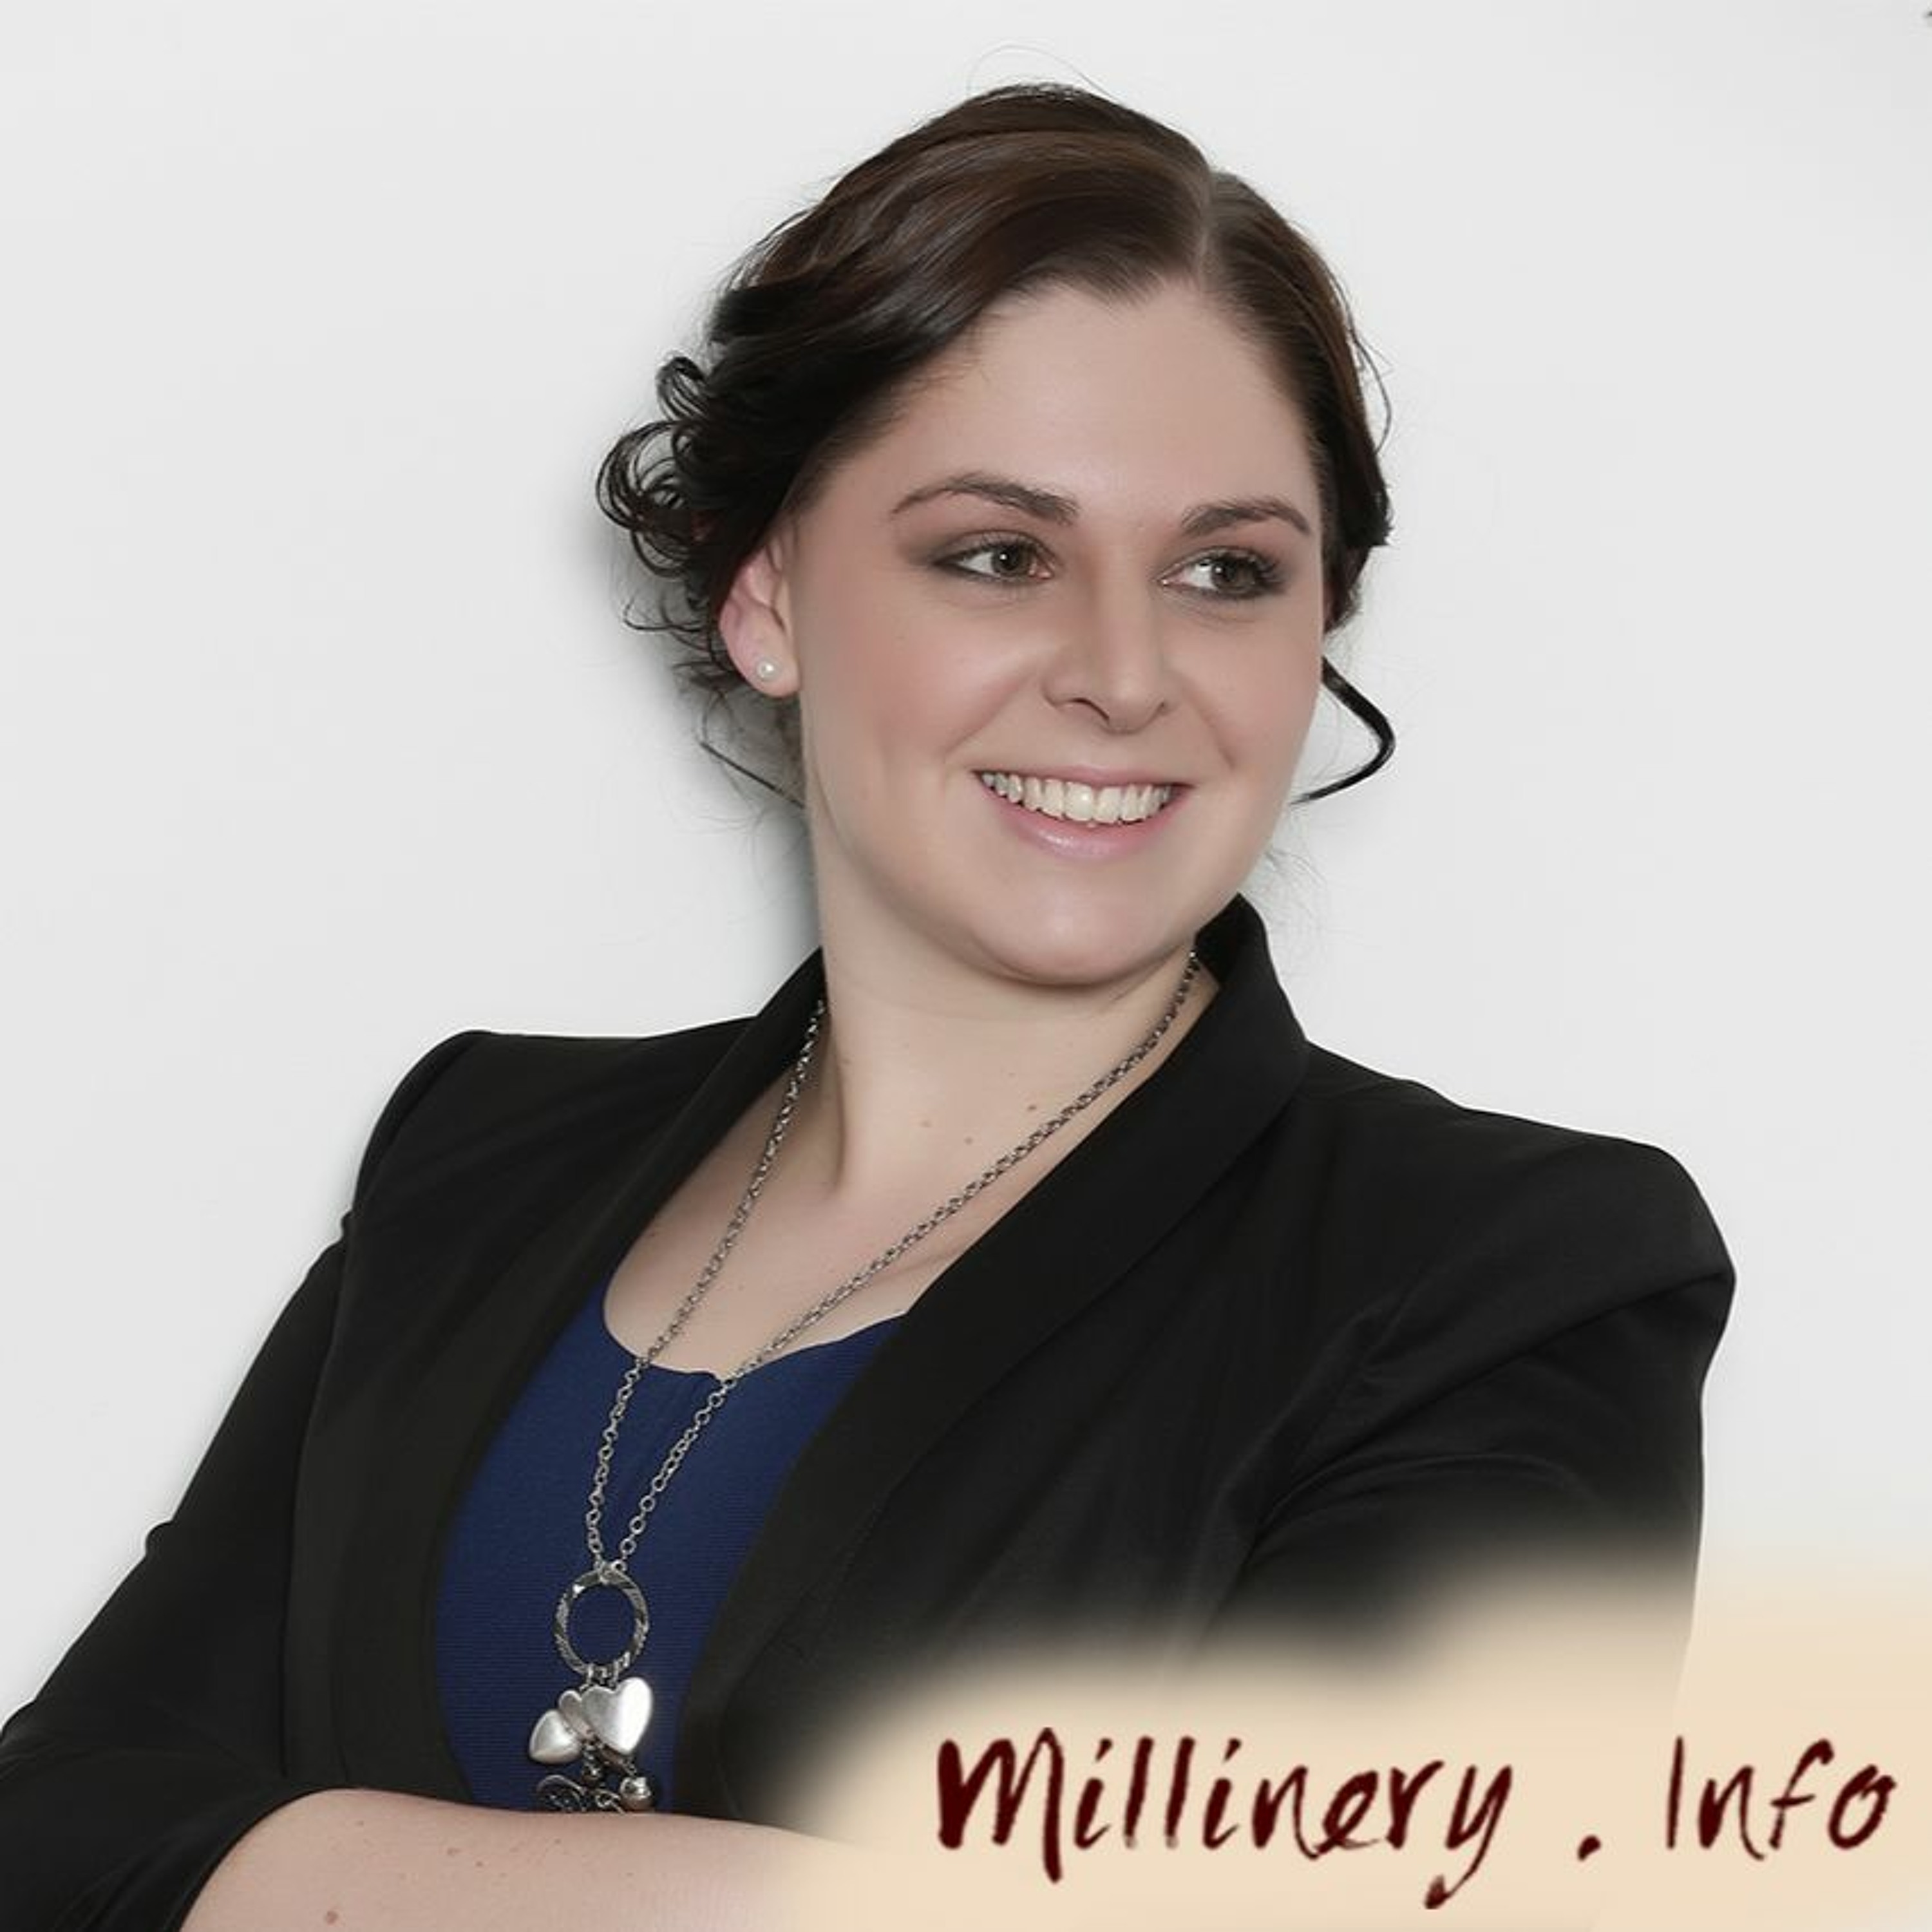 Amelda Millinery with Rebecca Carswell - Millinery.Info Podcast